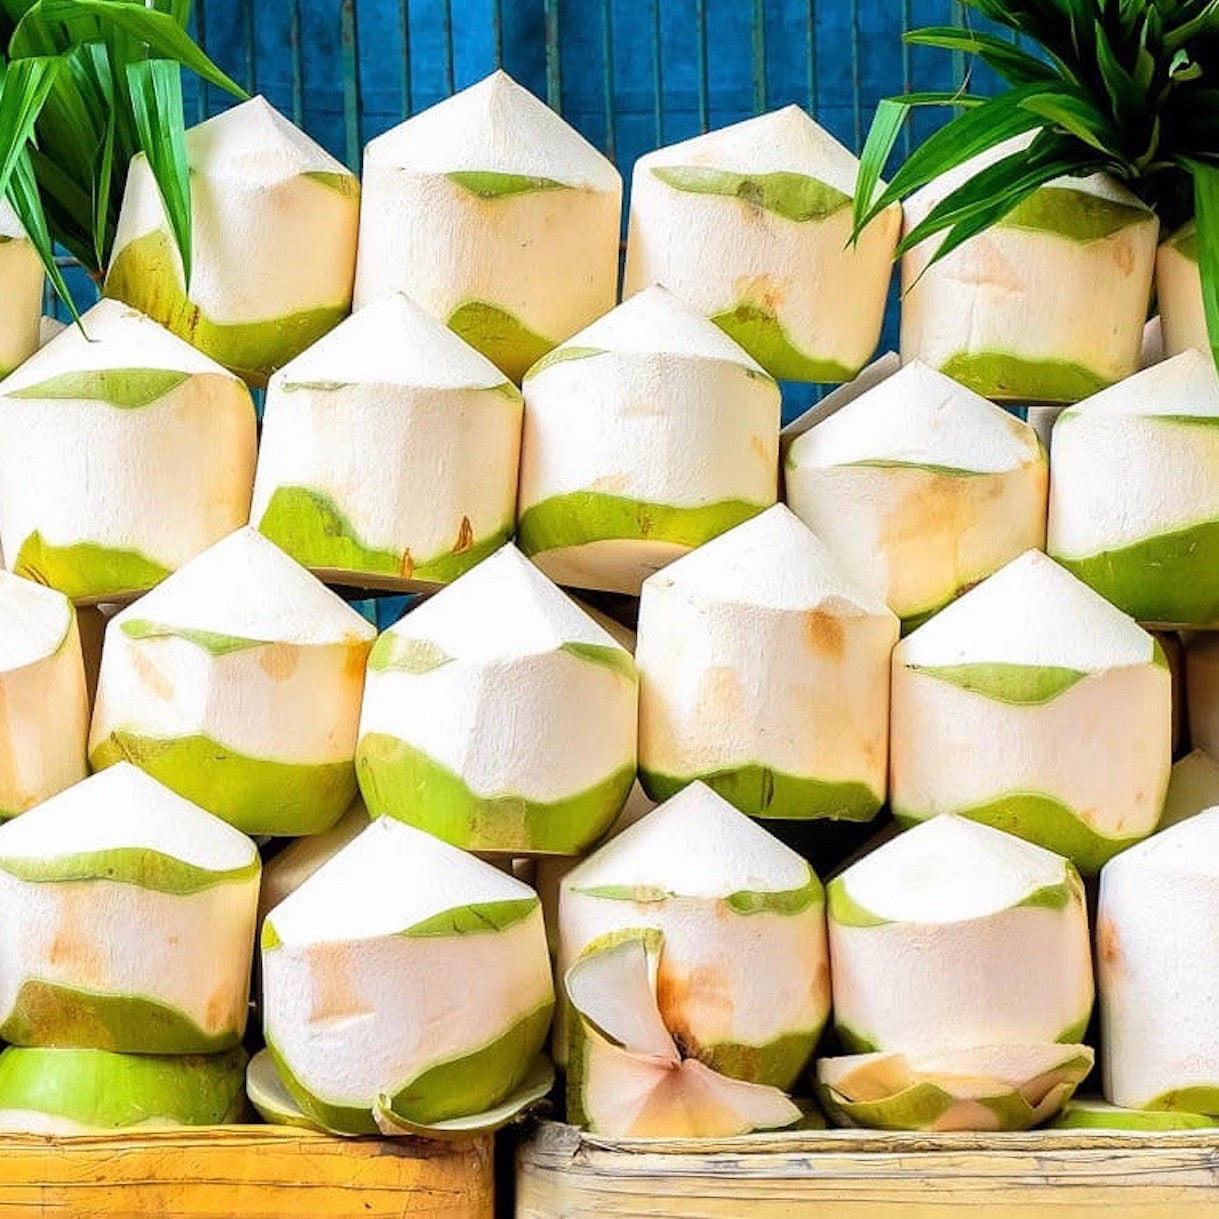 fresh-coconut-online-delivery-grocery-supermarket-singapore-thenewgrocer